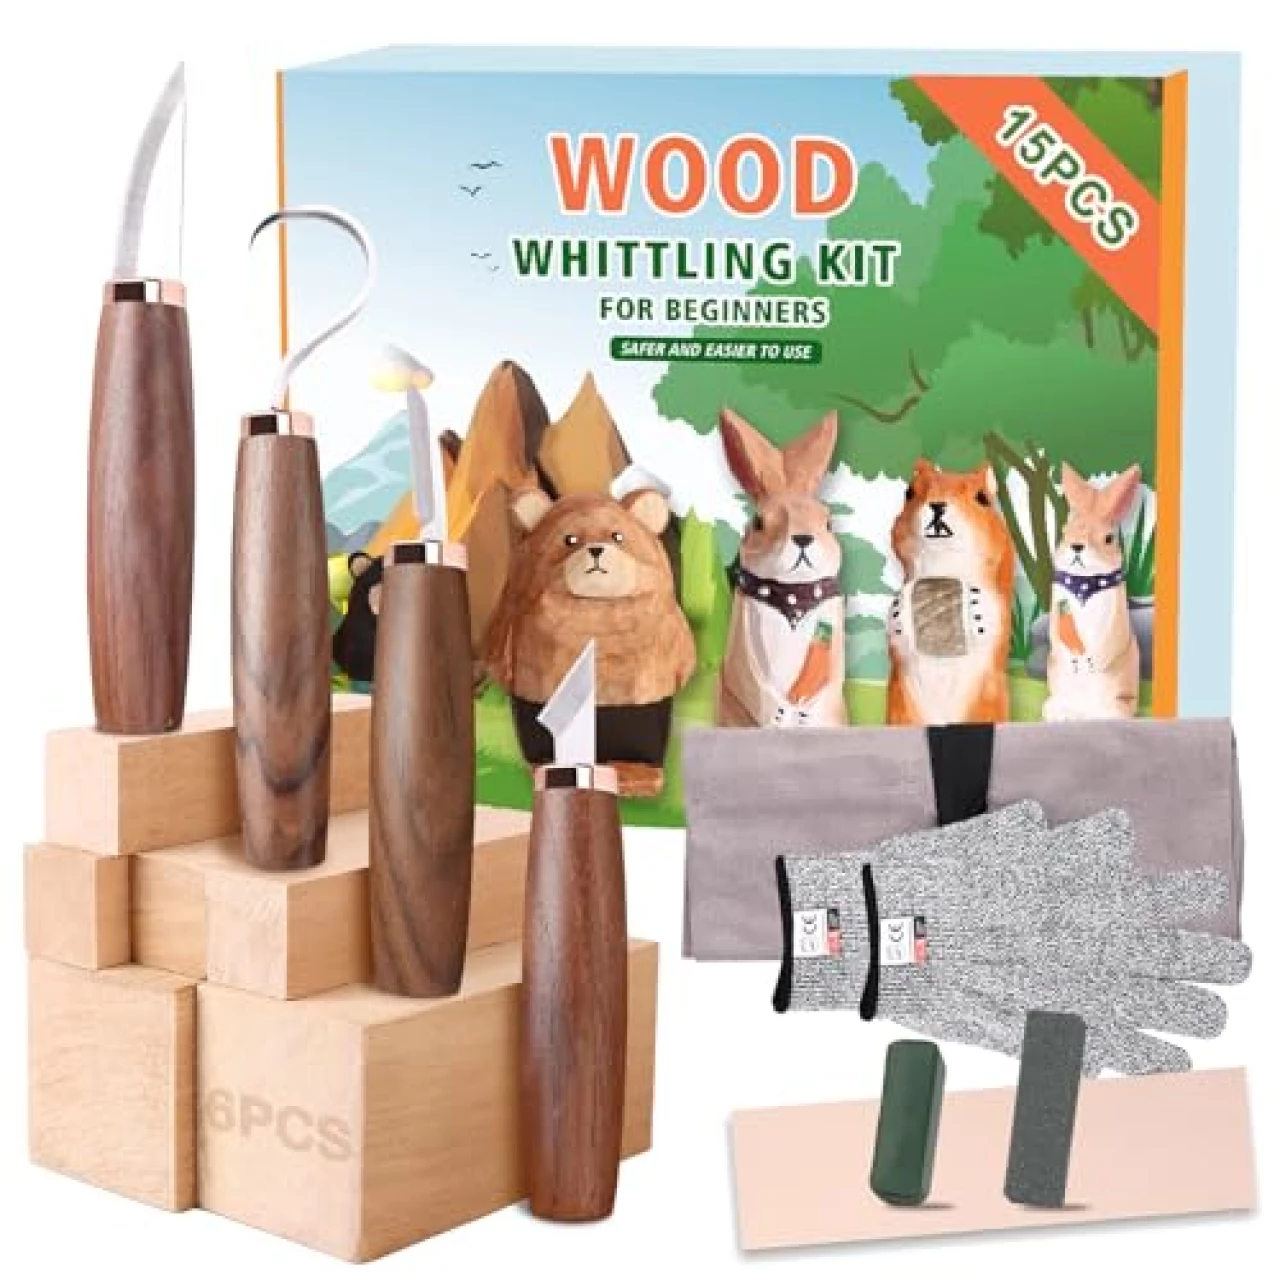 Wood Carving Tools Pack of 15- Includes Black Walnut Handle Wood Carving Knife,Whittling Knife,Hook Knife,Polishing Compound,Sharpening Stone,Cut Resistant Gloves,Wood Carving Kit for Beginners.